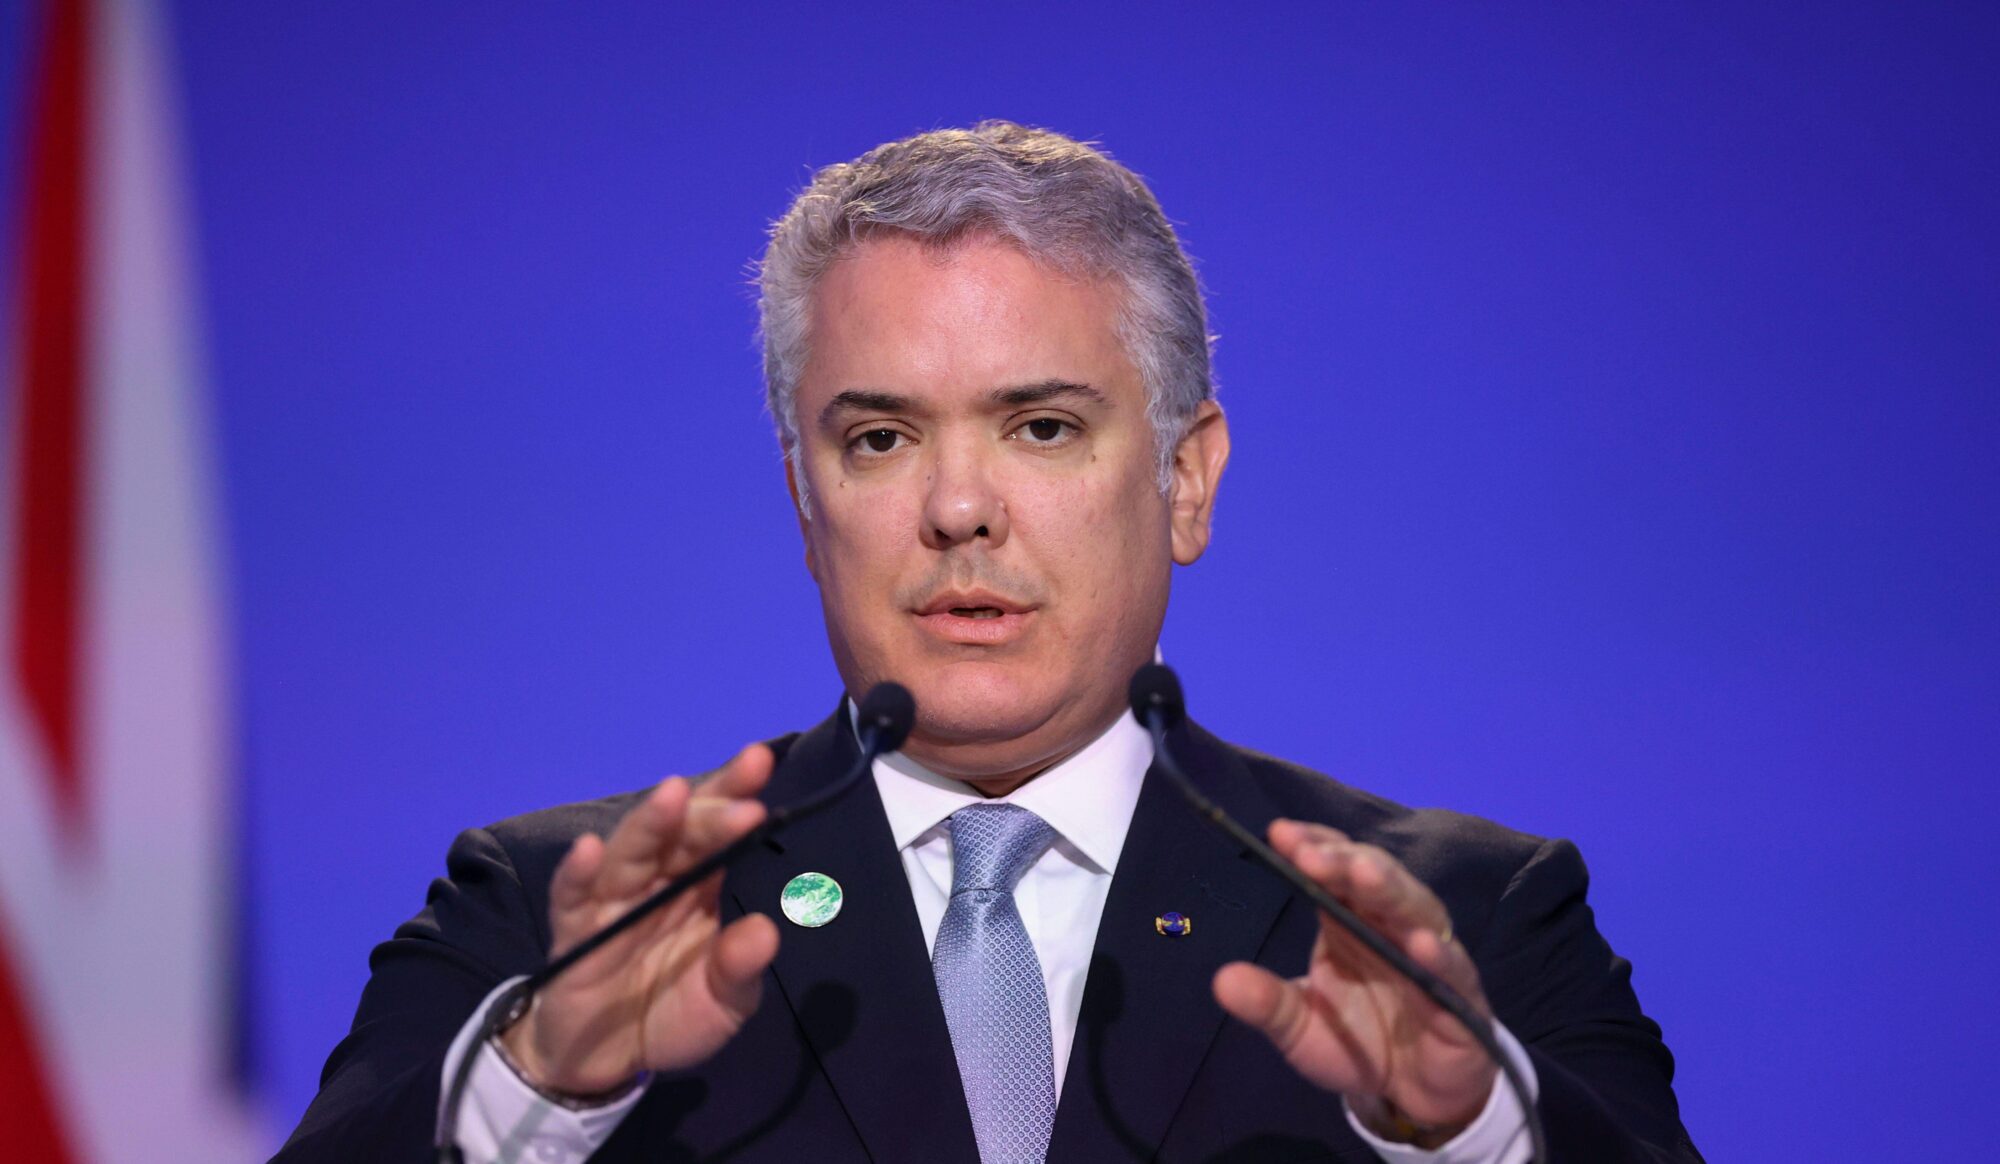 <p>Colombia&#8217;s President Iván Duque at last year&#8217;s COP26 climate conference, where he introduced his nation&#8217;s strategy for carbon neutrality by 2050. Experts say his government&#8217;s plans to back natural gas as a transition fuel threatens these commitments. (Image: Hannah McKay / Alamy)</p>